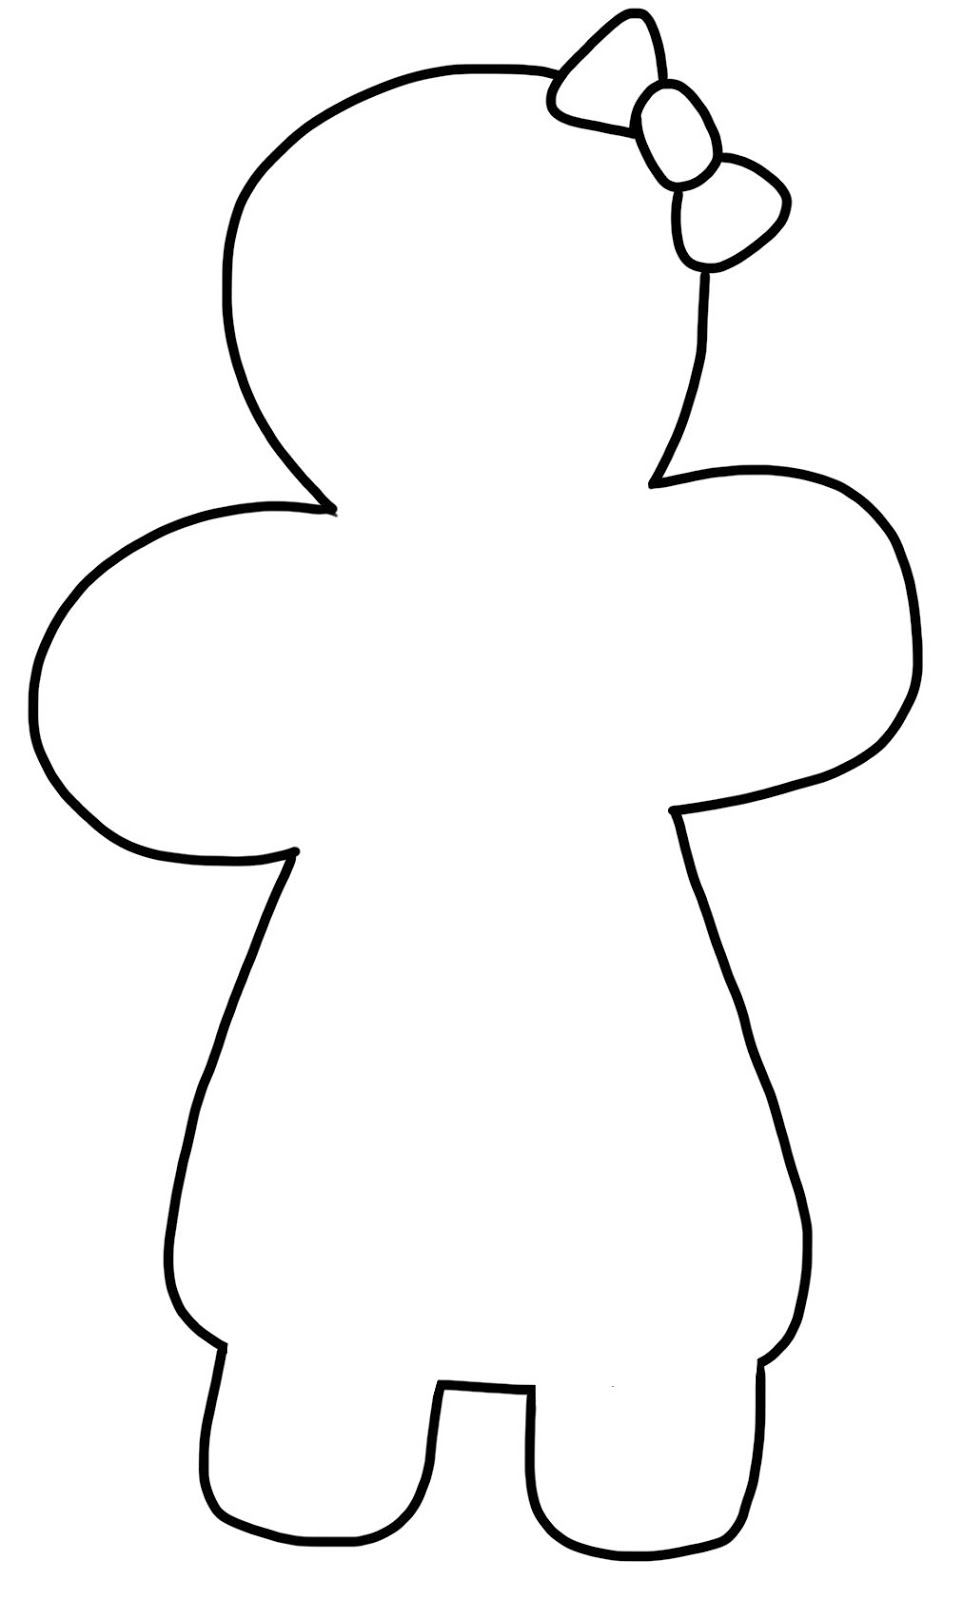 boy and girl outline clip art - photo #8